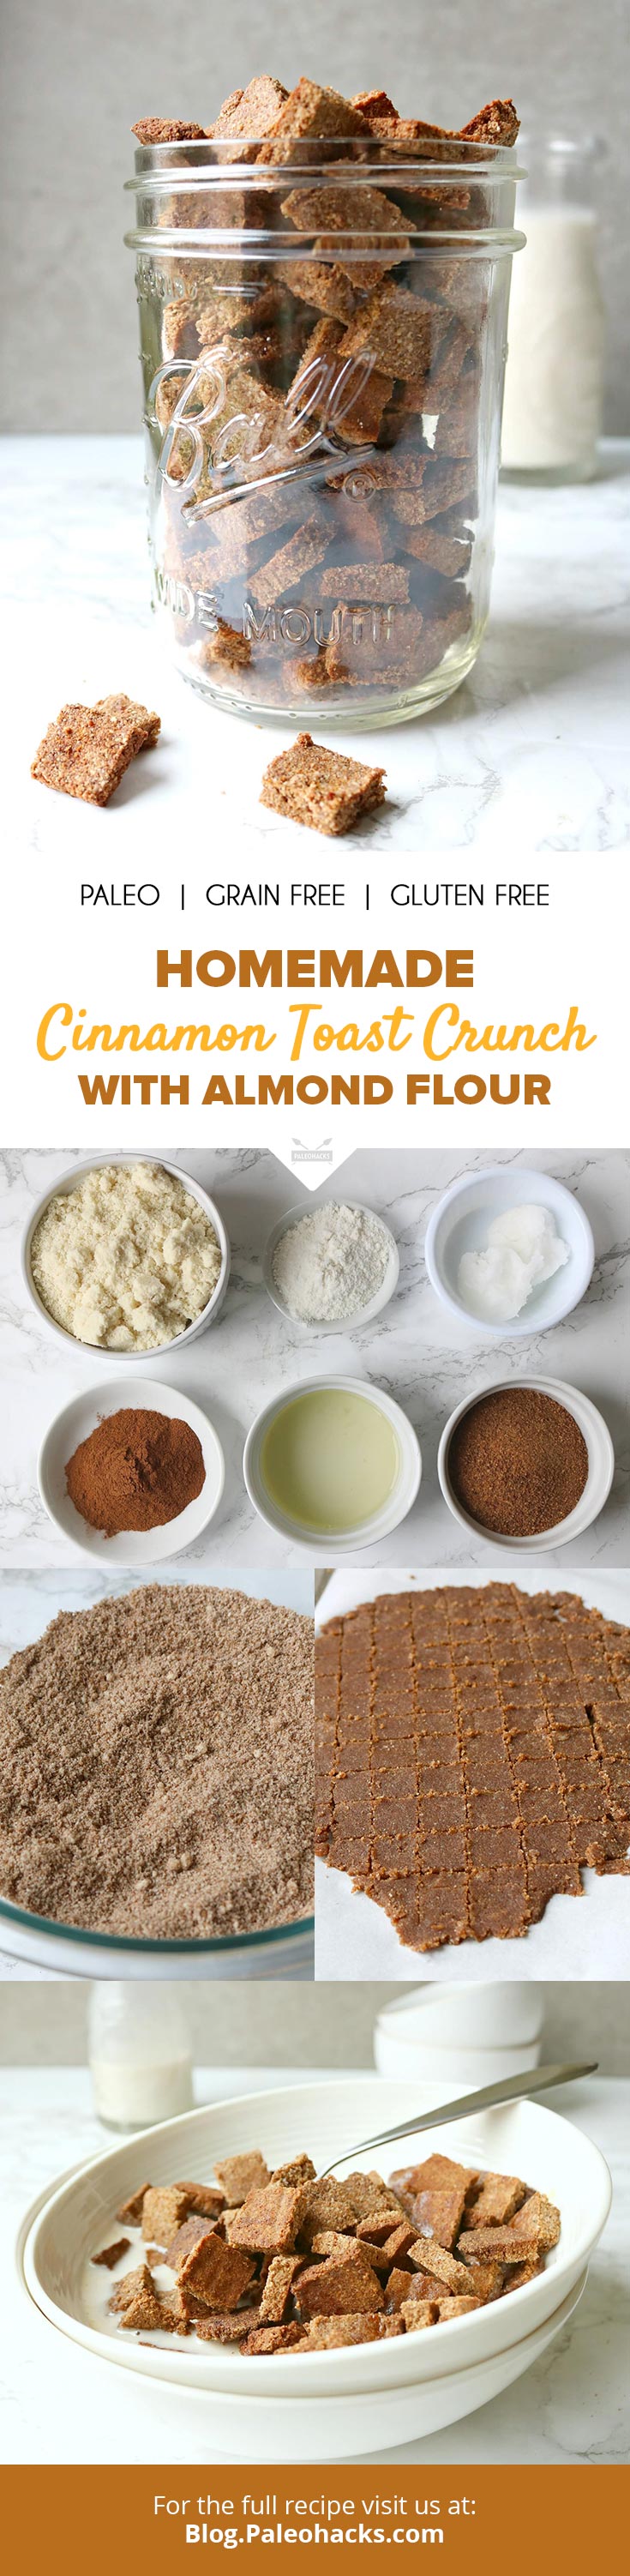 Grab a spoonful of this Cinnamon Toast Crunch cereal that’s completely free of refined sugar and wheat.